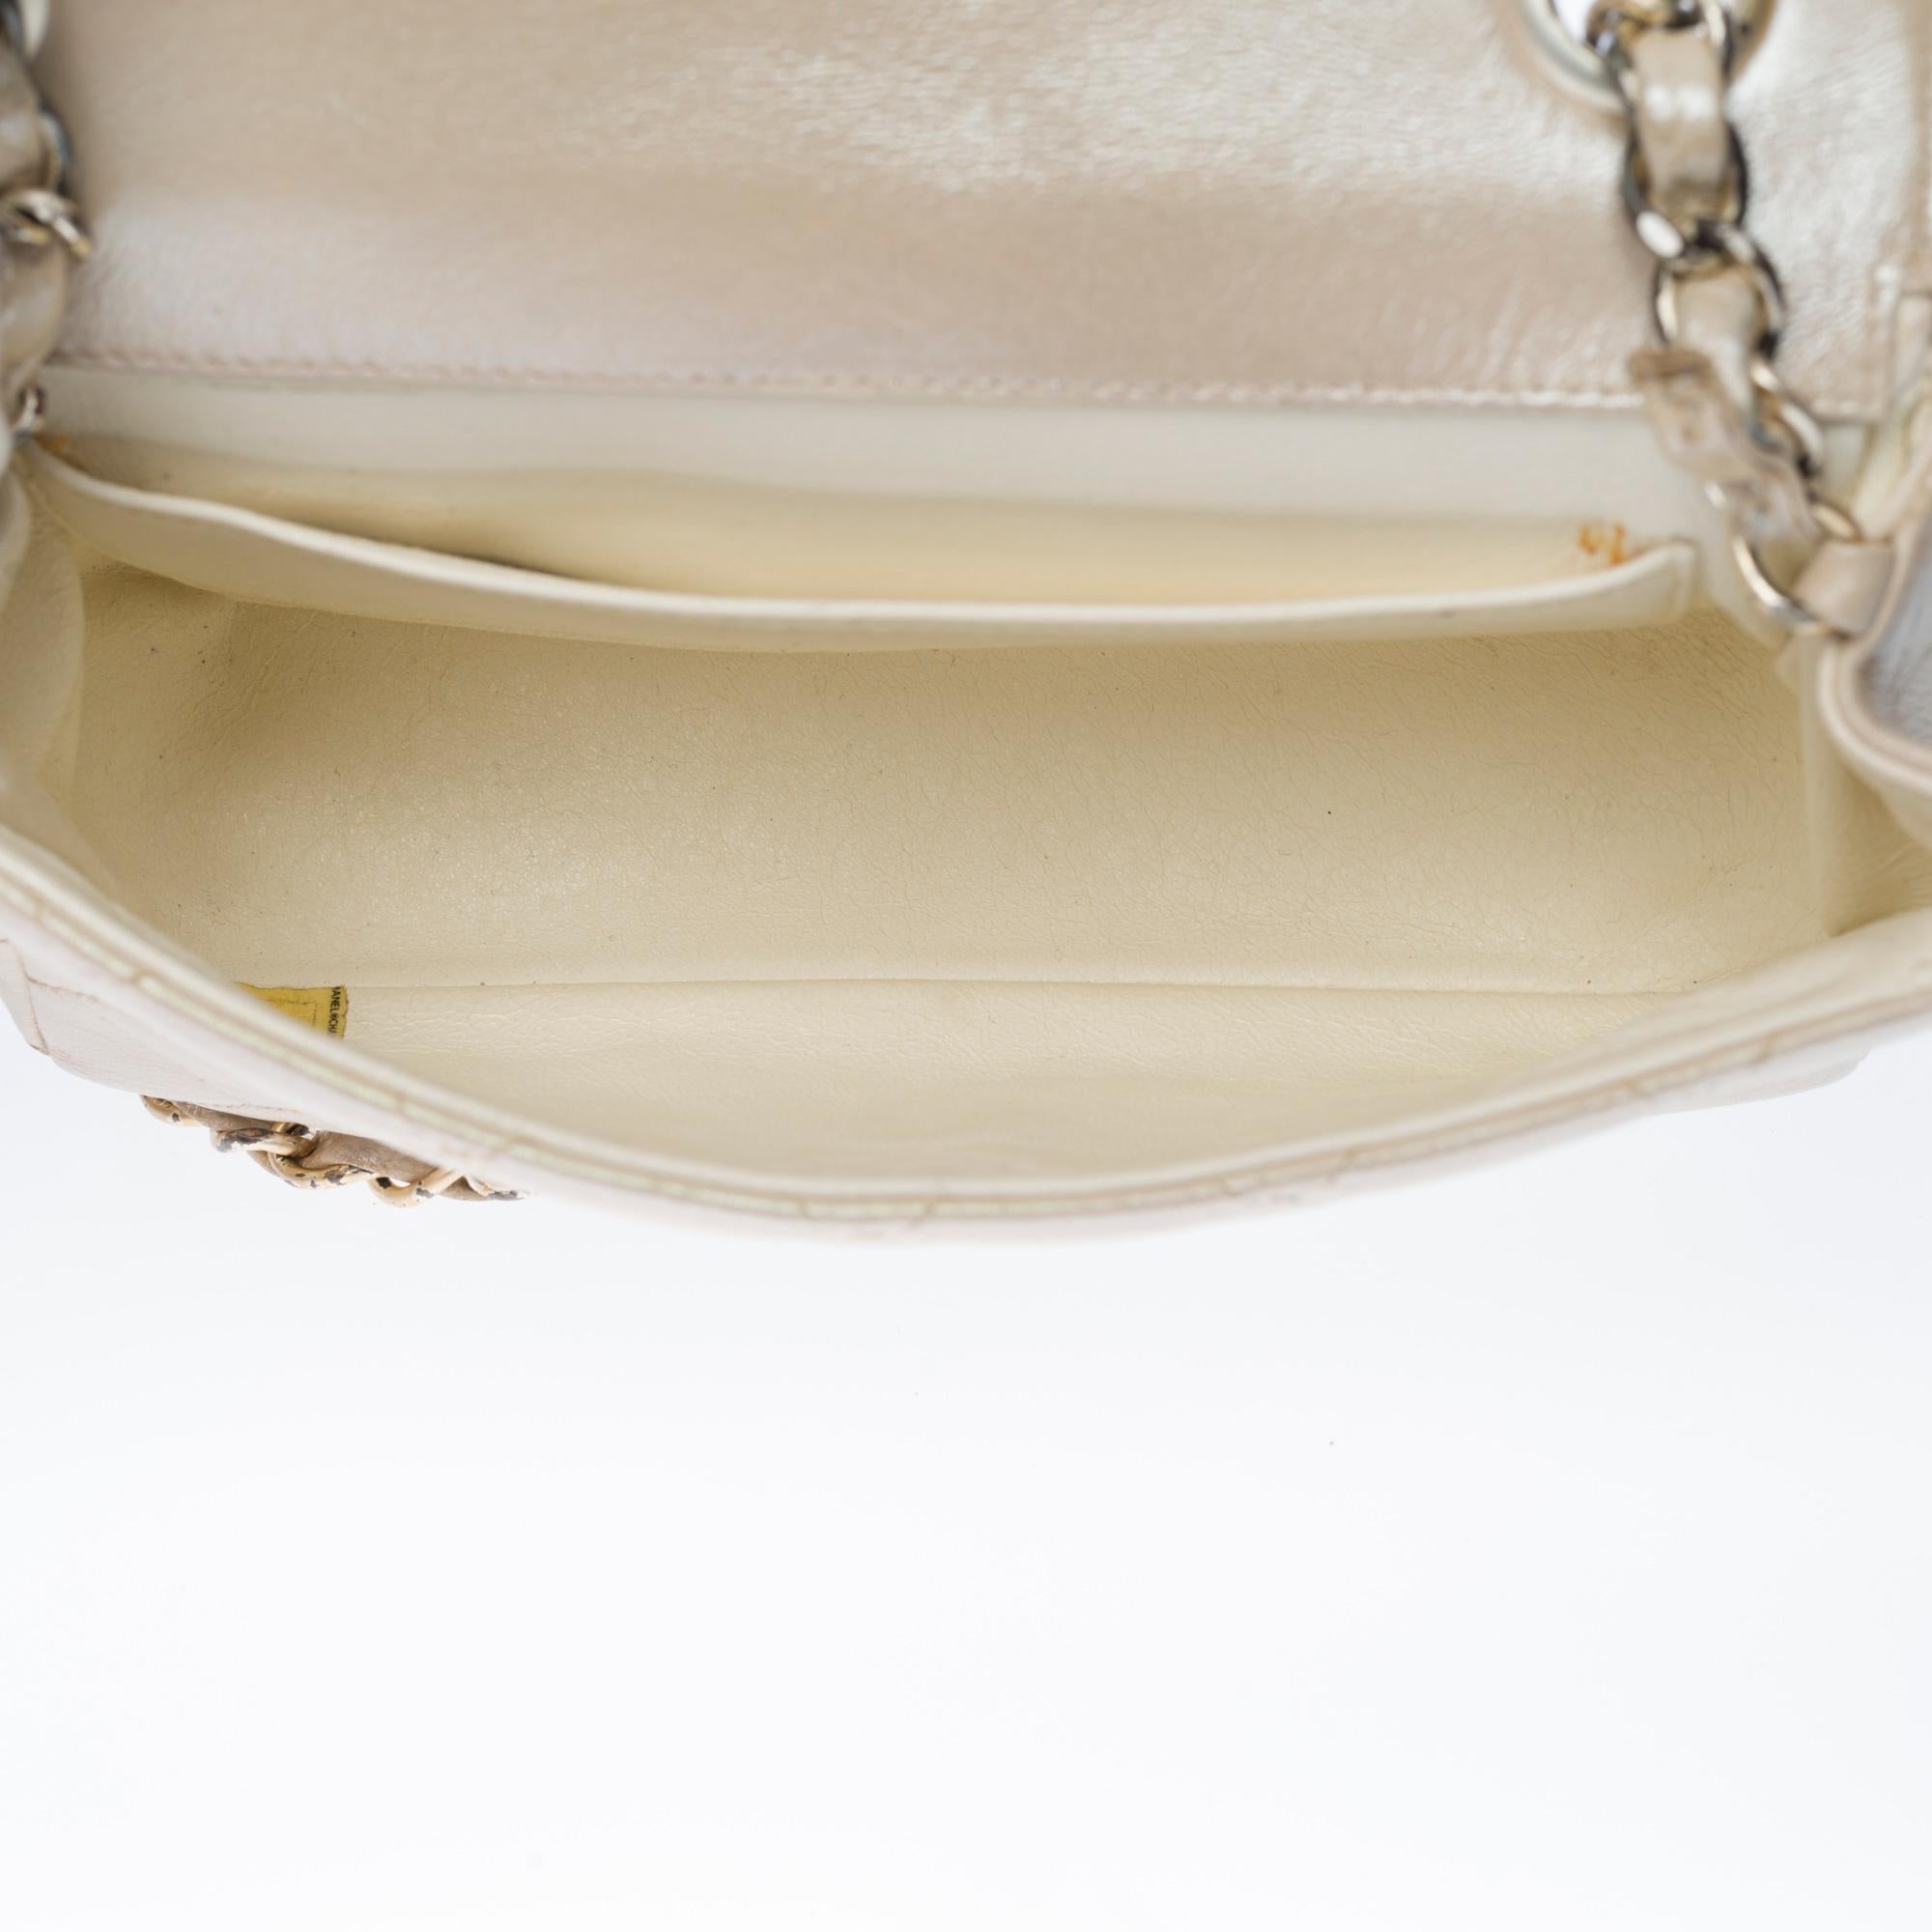 Chanel Mini Timeless flap shoulder bag in metallic mother-of-pearl leather, GHW 2